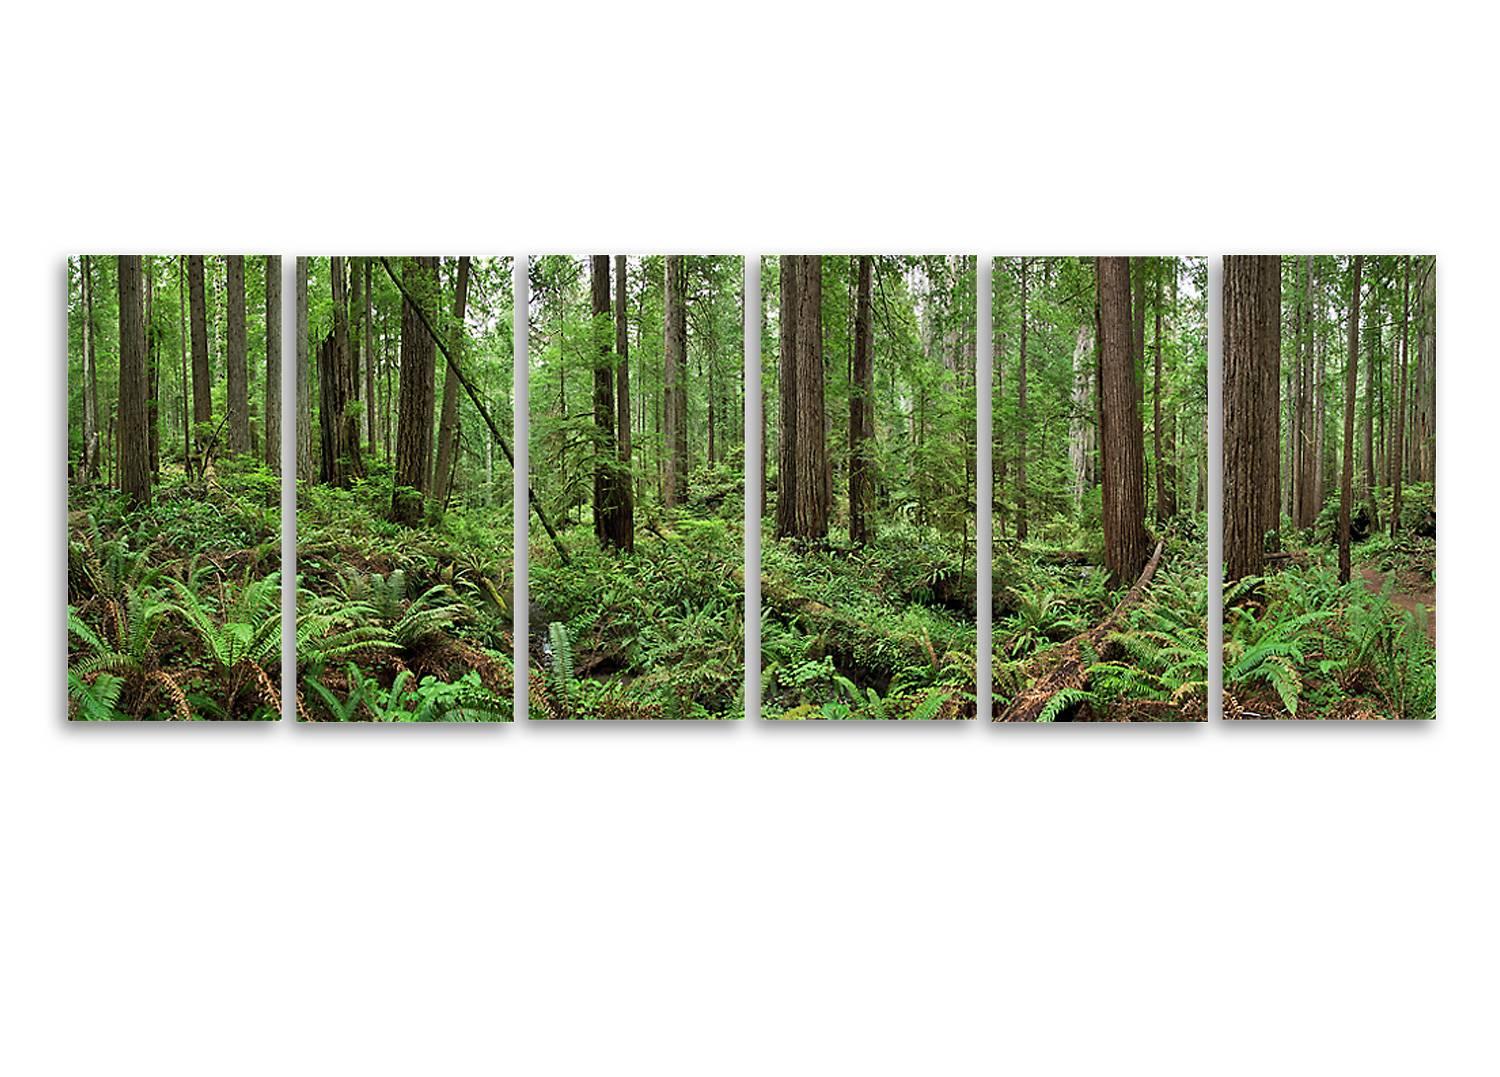 Redwoods - large format nature forest panorama in six individual glass panels